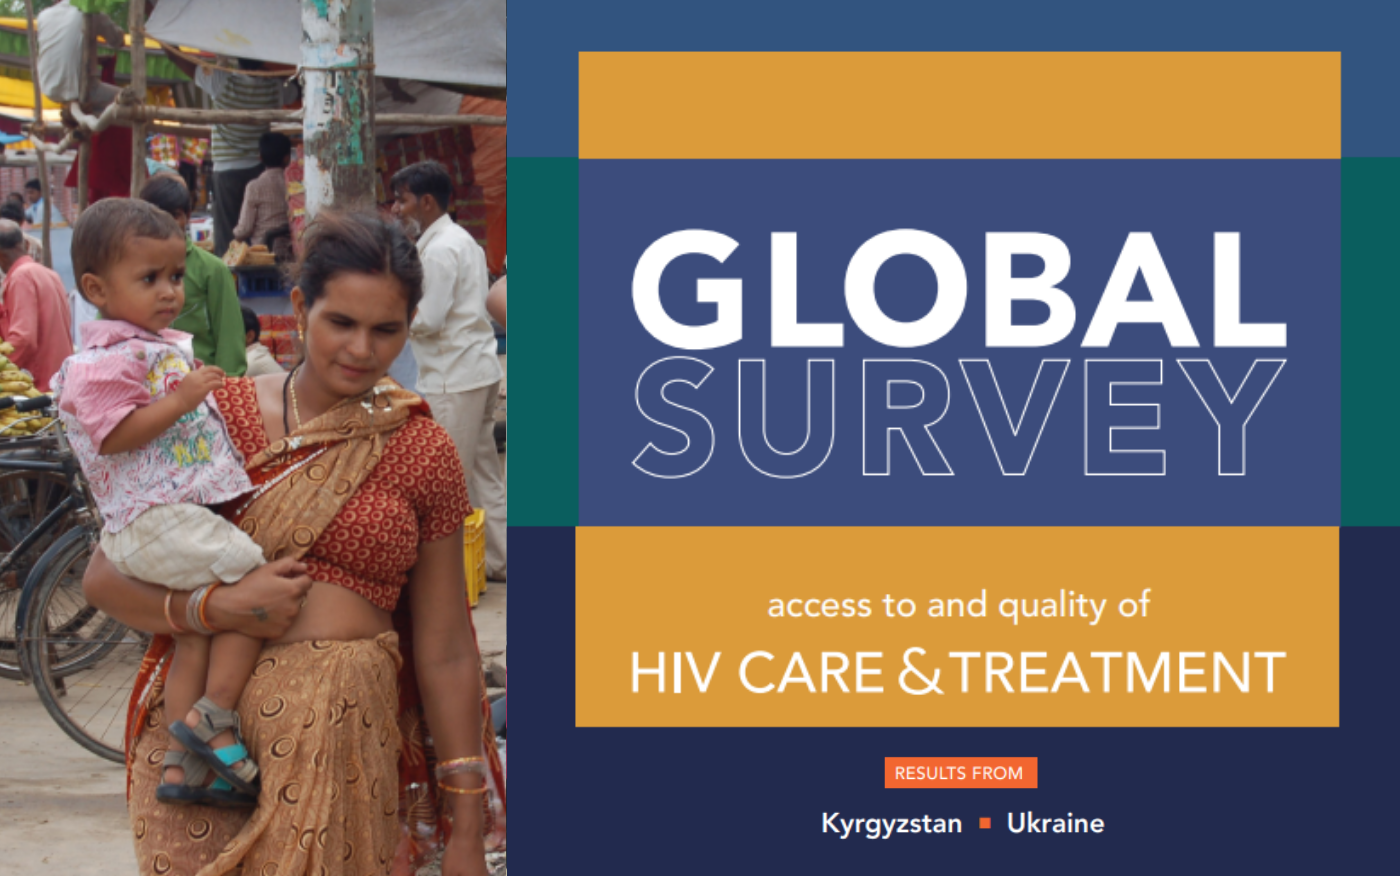 Global survey access to and quality of HIV care and treatment - eeca kyrgyzstan and ukraine